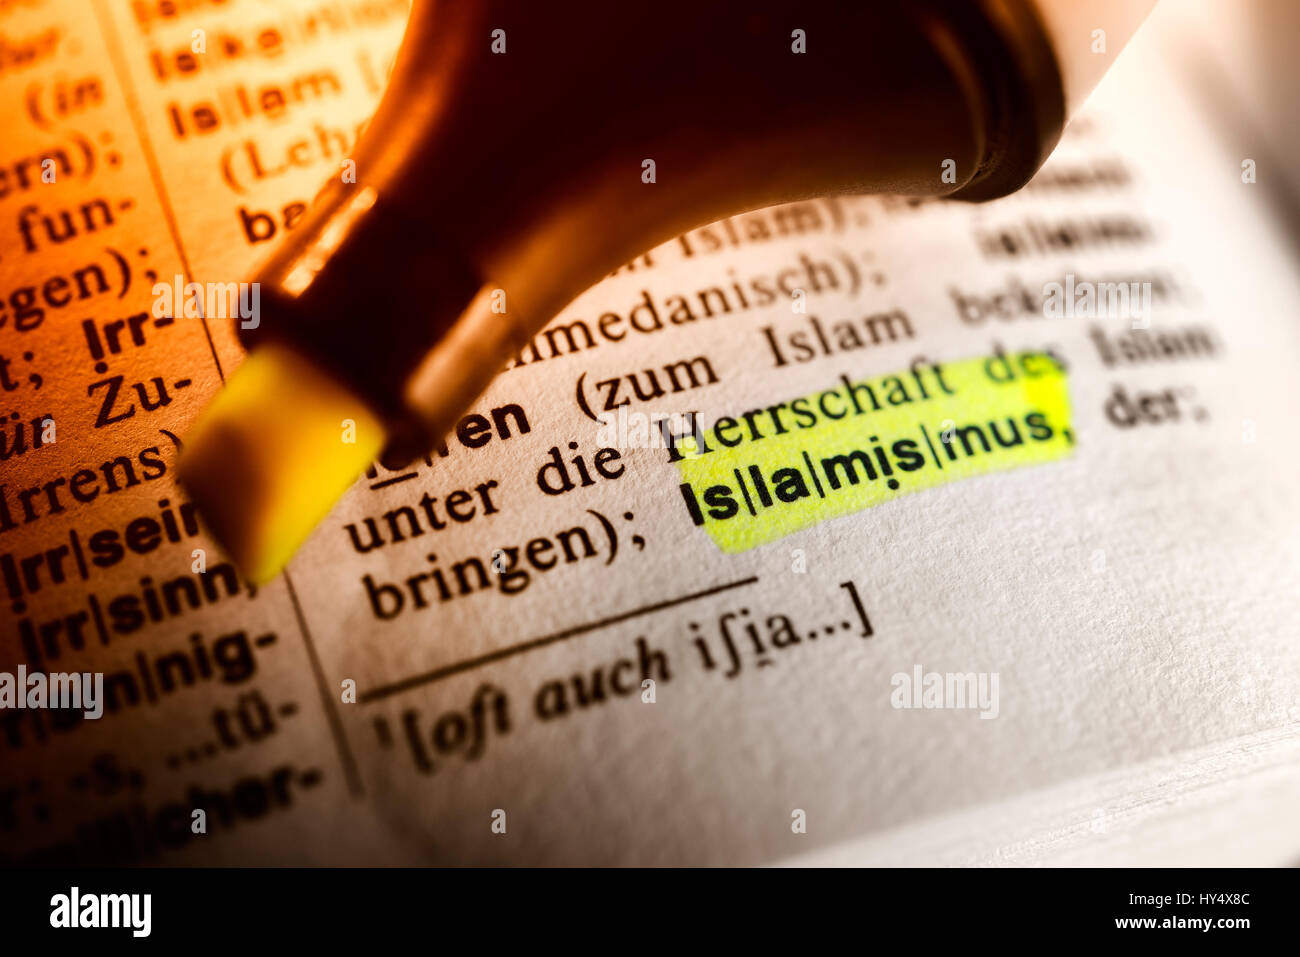 The word Islamism in a dictionary, Das Wort Islamismus in einem Woerterbuch Stock Photo